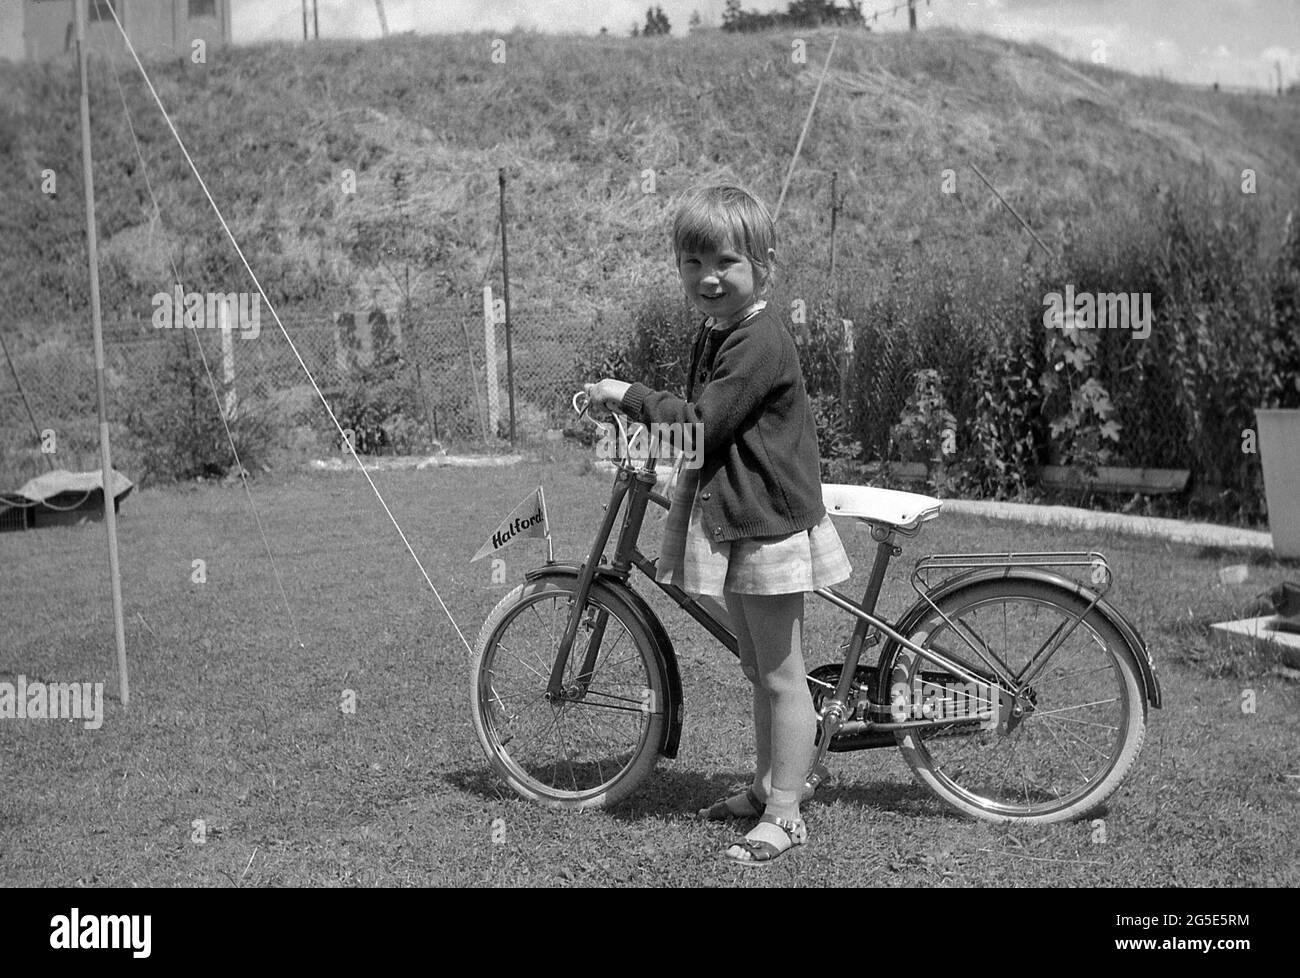 1960s, historical, a young girl in a garden standing proudly with her bicycle, England, UK. On the front mudguard of the bicycle is a small flag with the name Halfords, a leading bicycle retailer of the era. Stock Photo